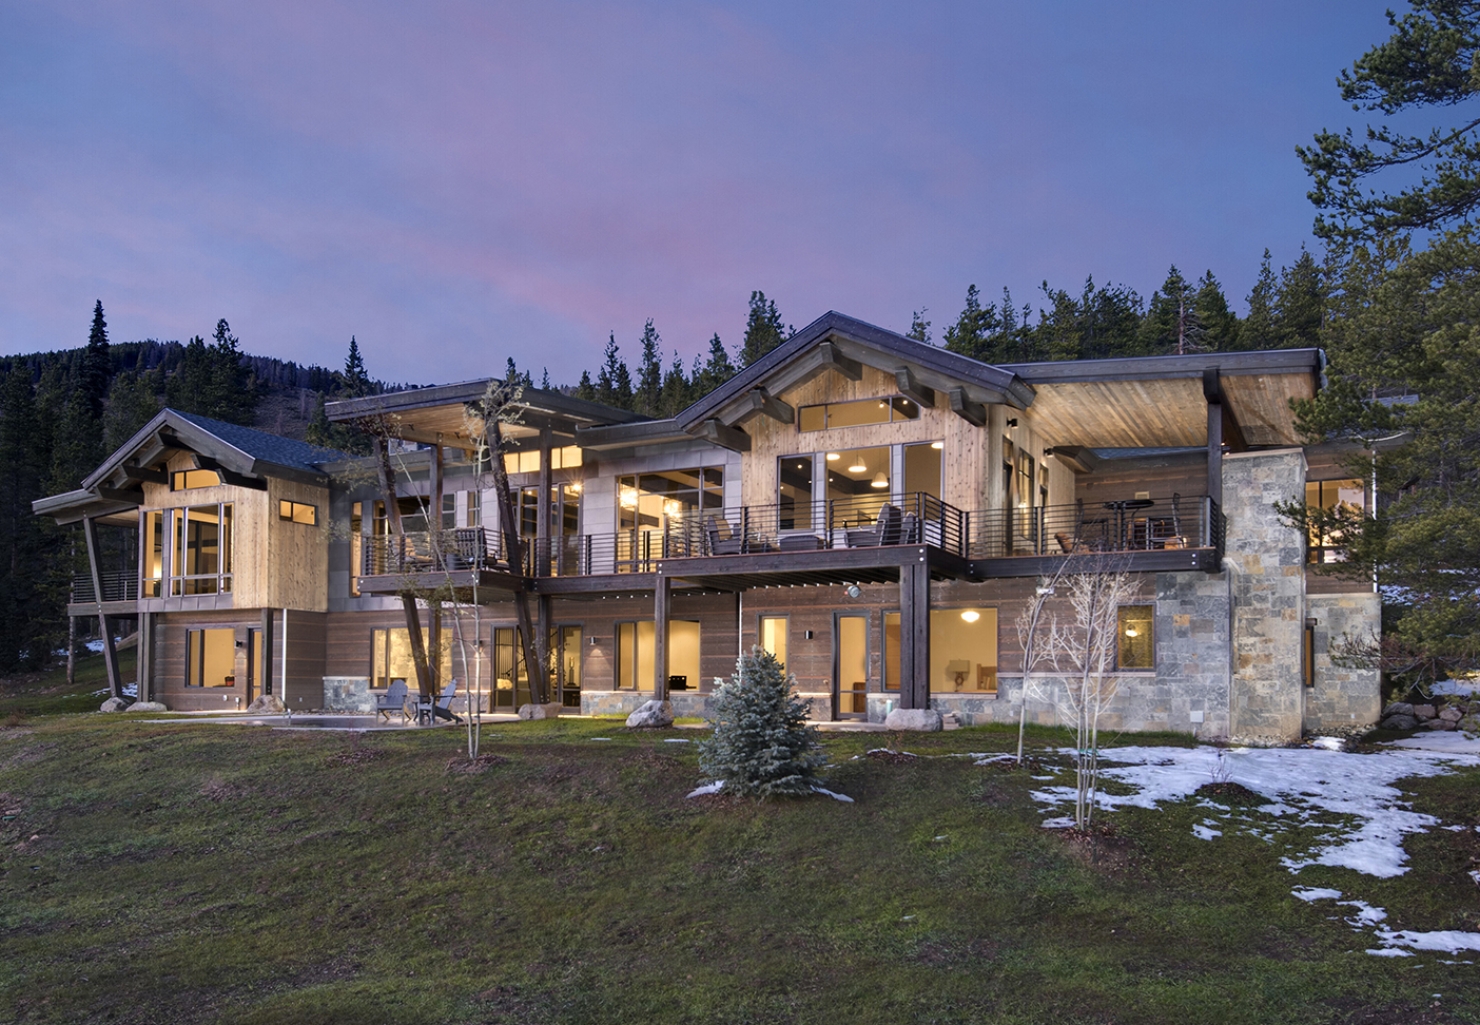   BUILDERS OF AWARD-WINNING MOUNTAIN HOMES   Put our 30-plus years construction expertise to work for you. 